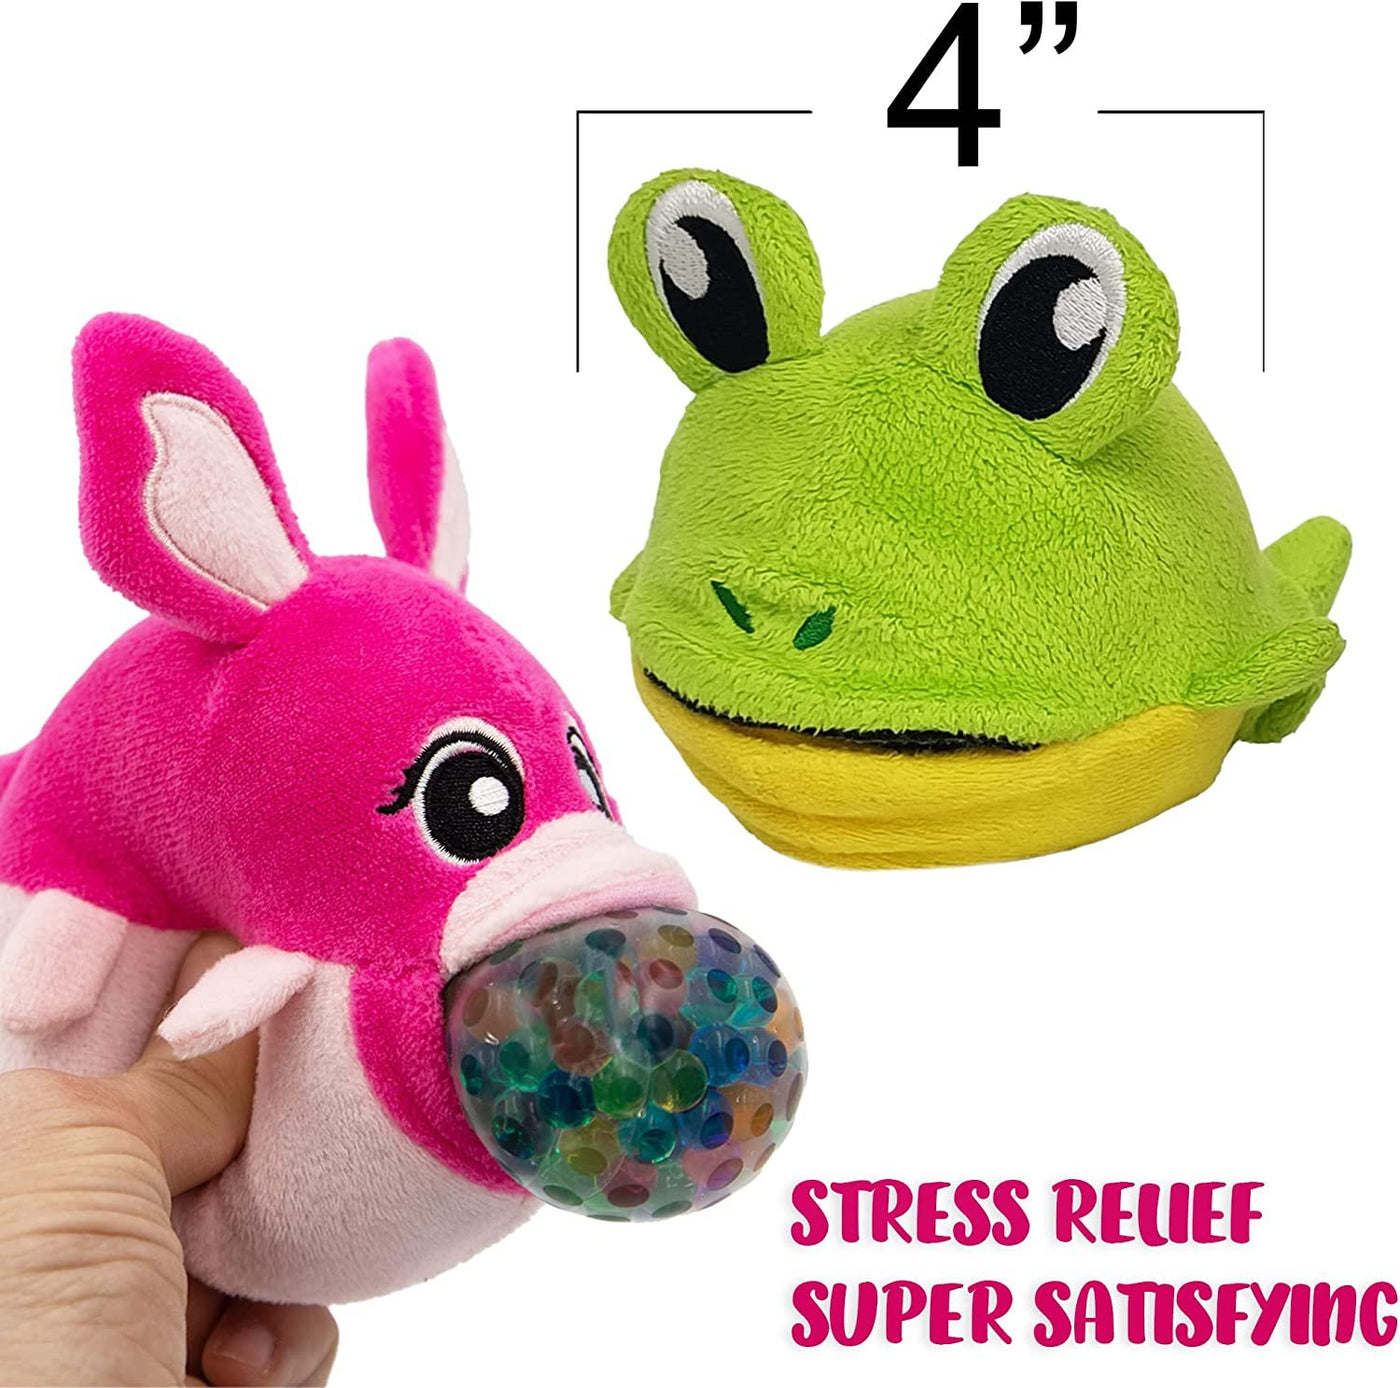 Plush Animal Toy with Squeezy Water Beads, Set of 2, Cute Stress Relief Sensory Toys for Boys and Girls, Zoo Safari Birthday Party Favors and Goodie Bag Fillers for Kids